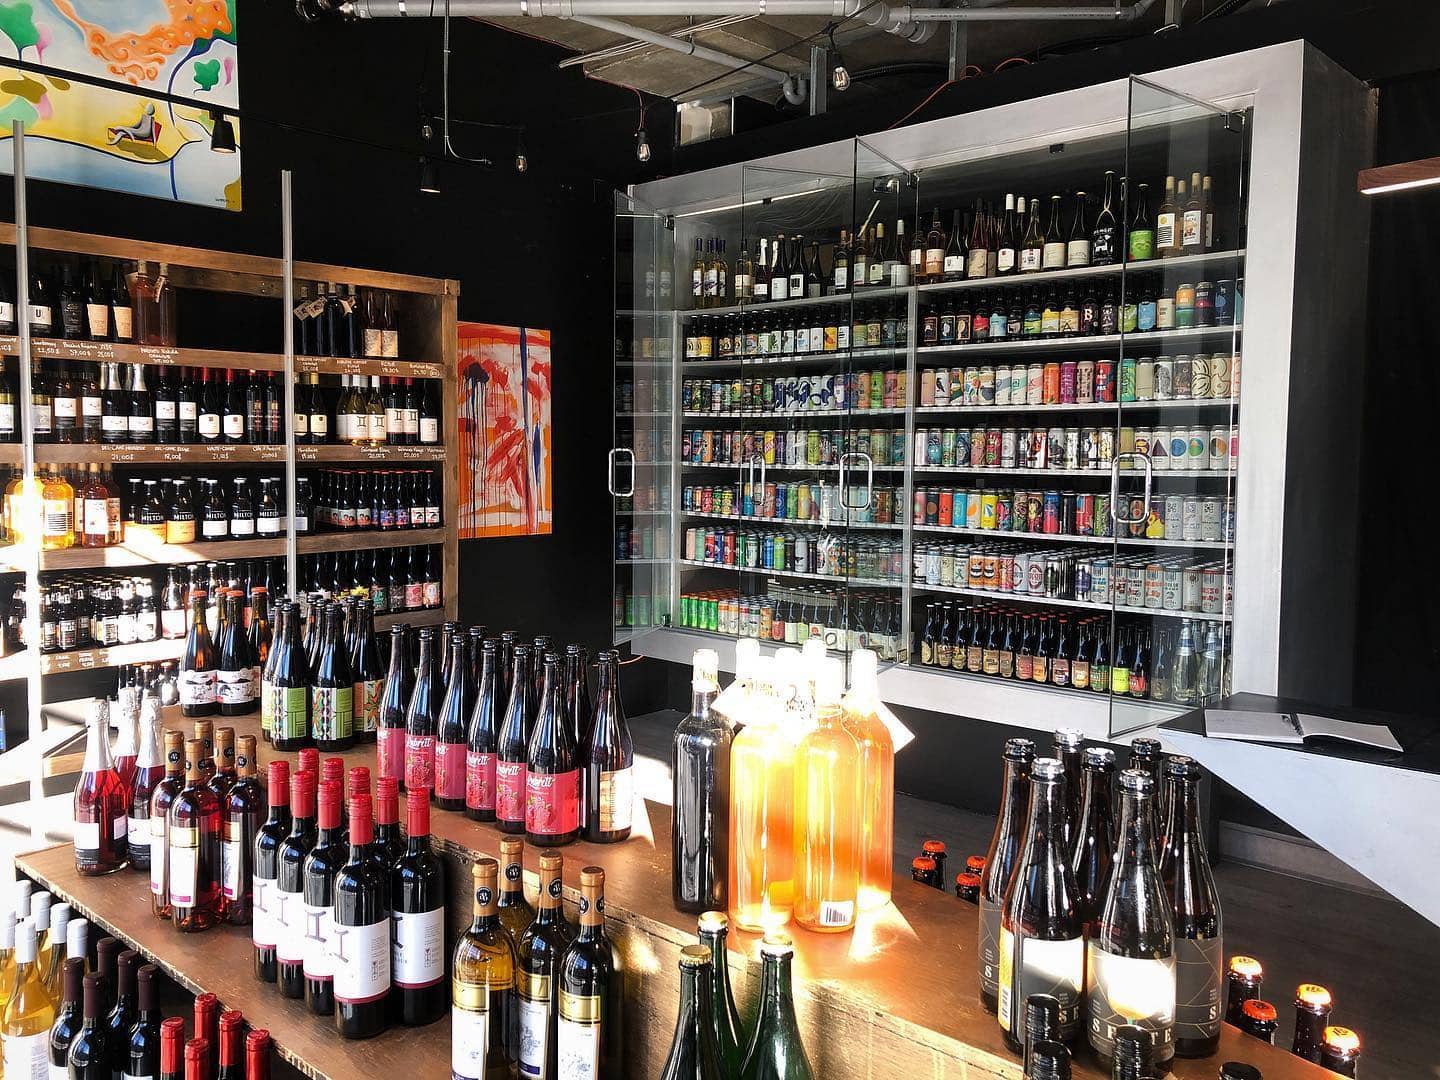 Quebec Beer & Wine: Where to buy them in Montreal